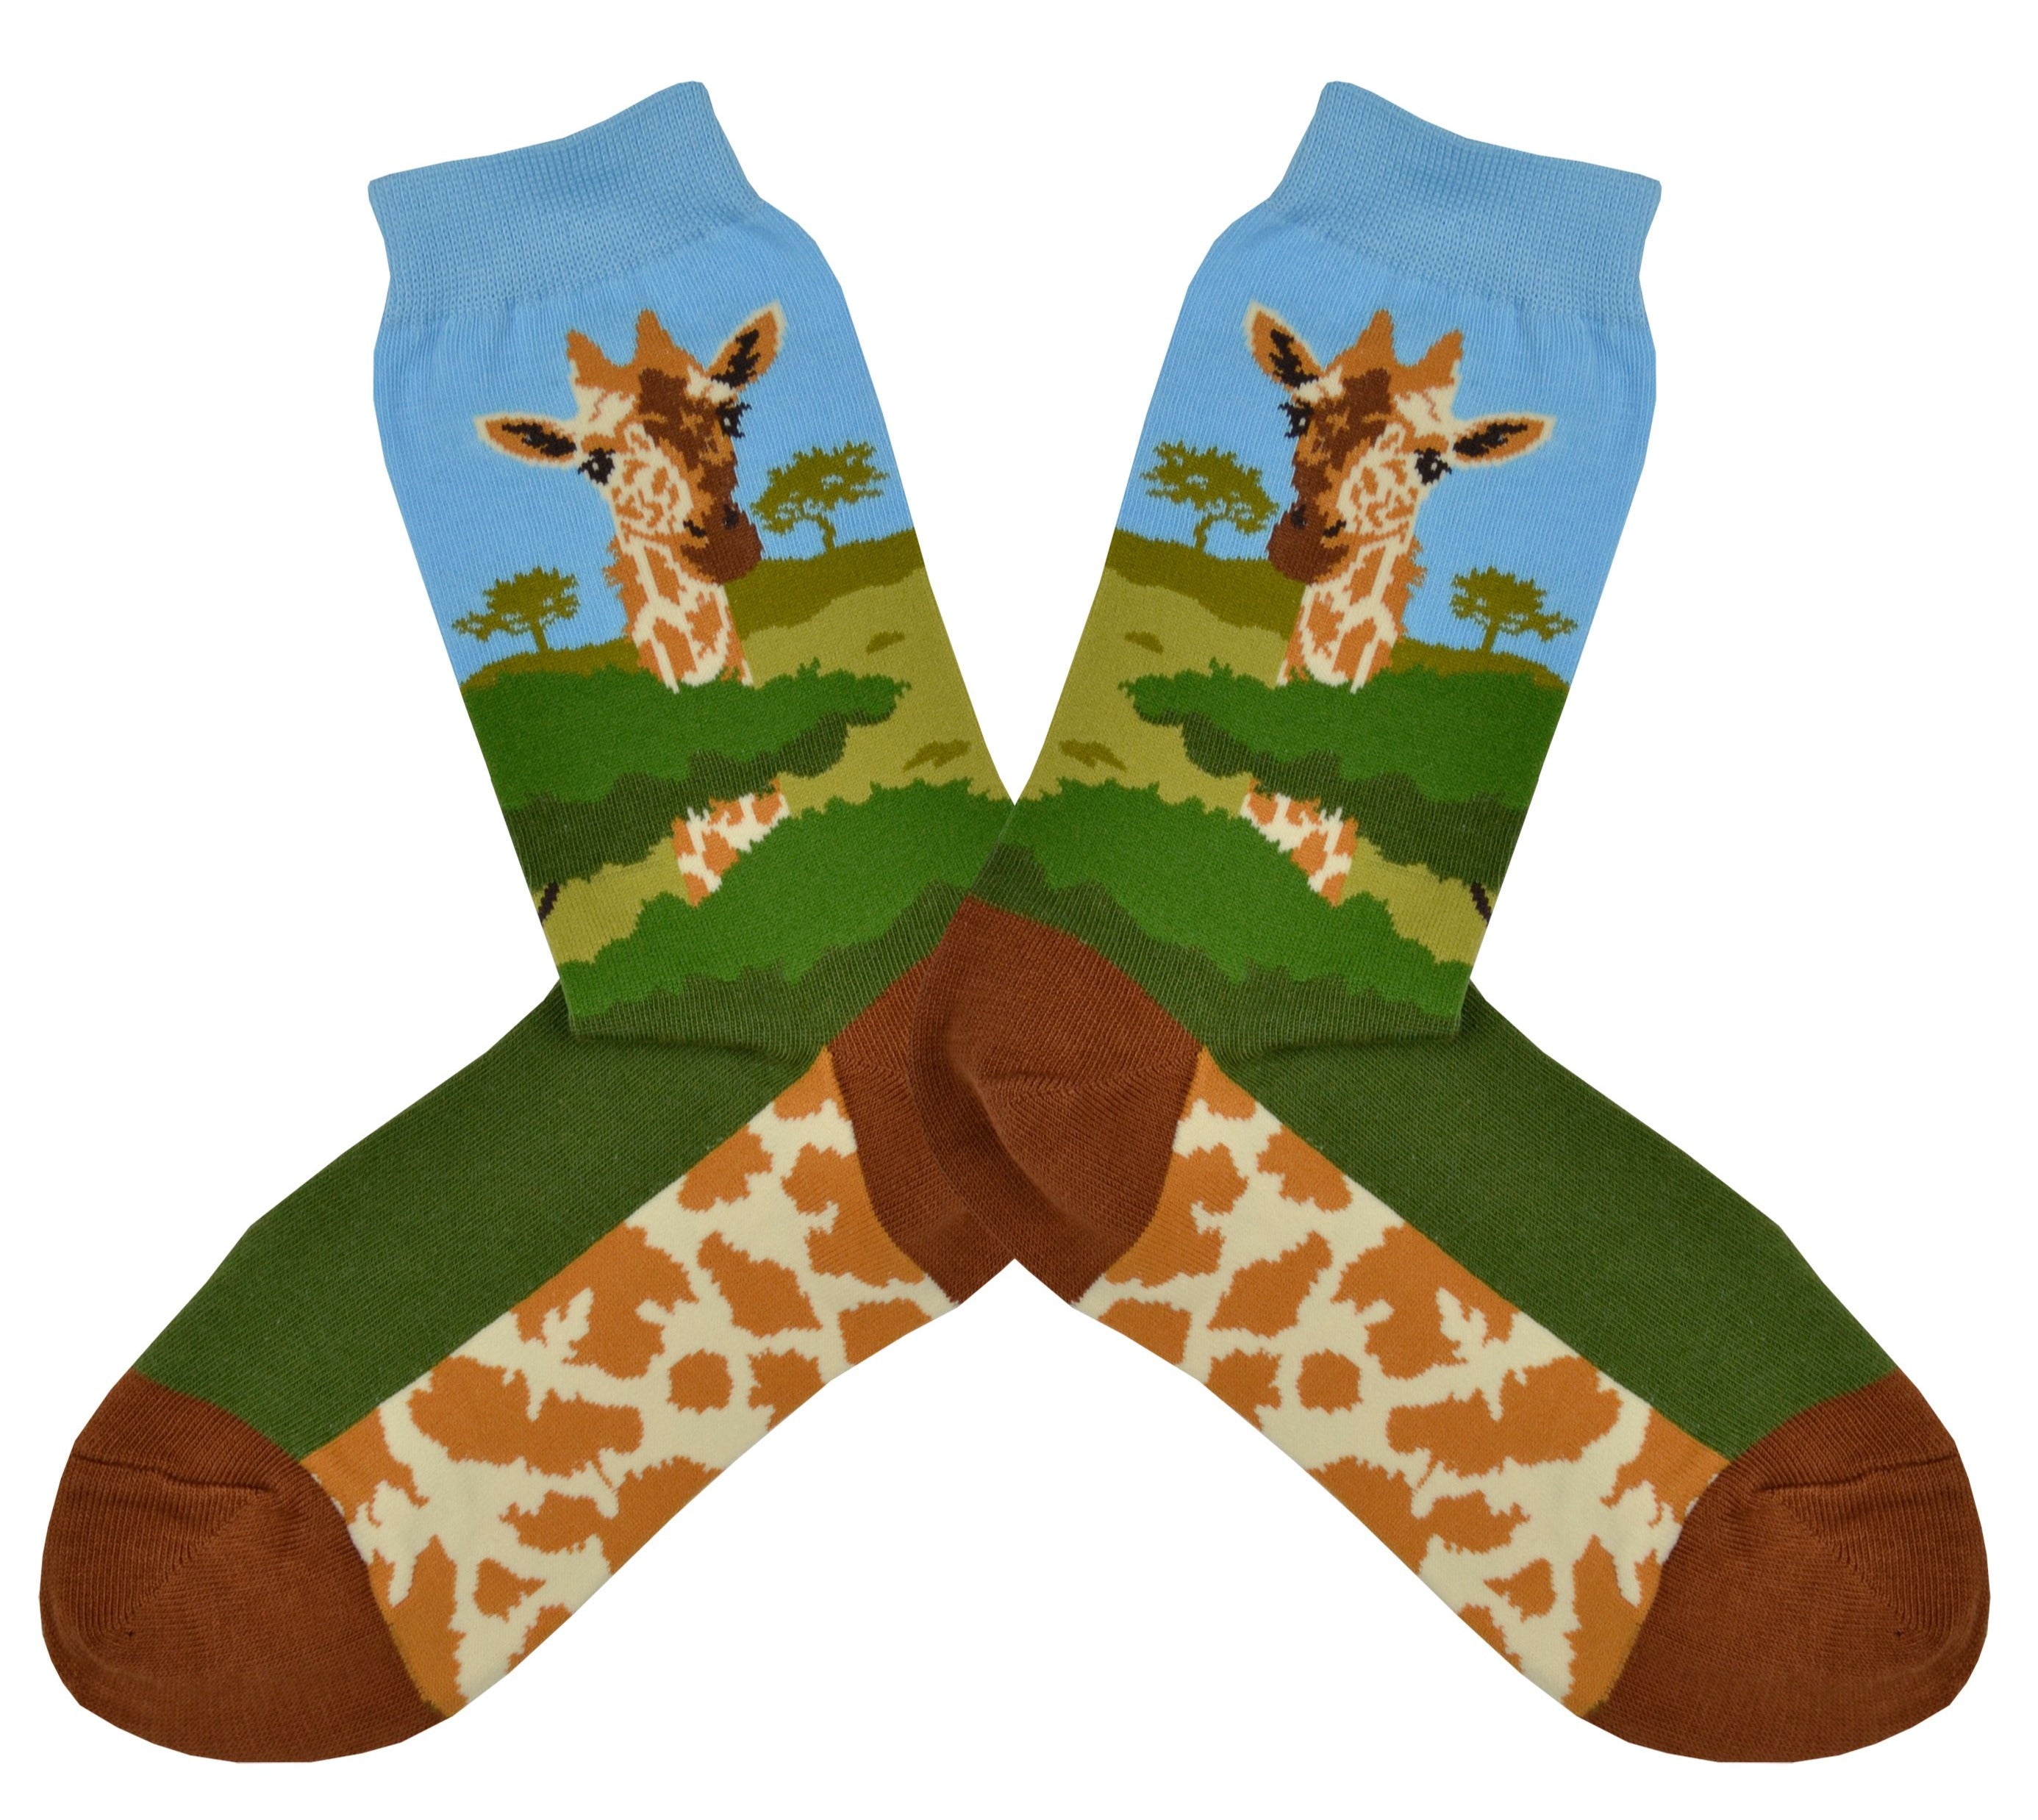 Shown in a flatlay, a pair of women's Foot Traffic brand cotton crew socks with a blue cuff and brown heel and toe. The leg of the sock has a giraffe head and neck with a savanna background. The foot is dark green on the top and the sole is a giraffe pattern.